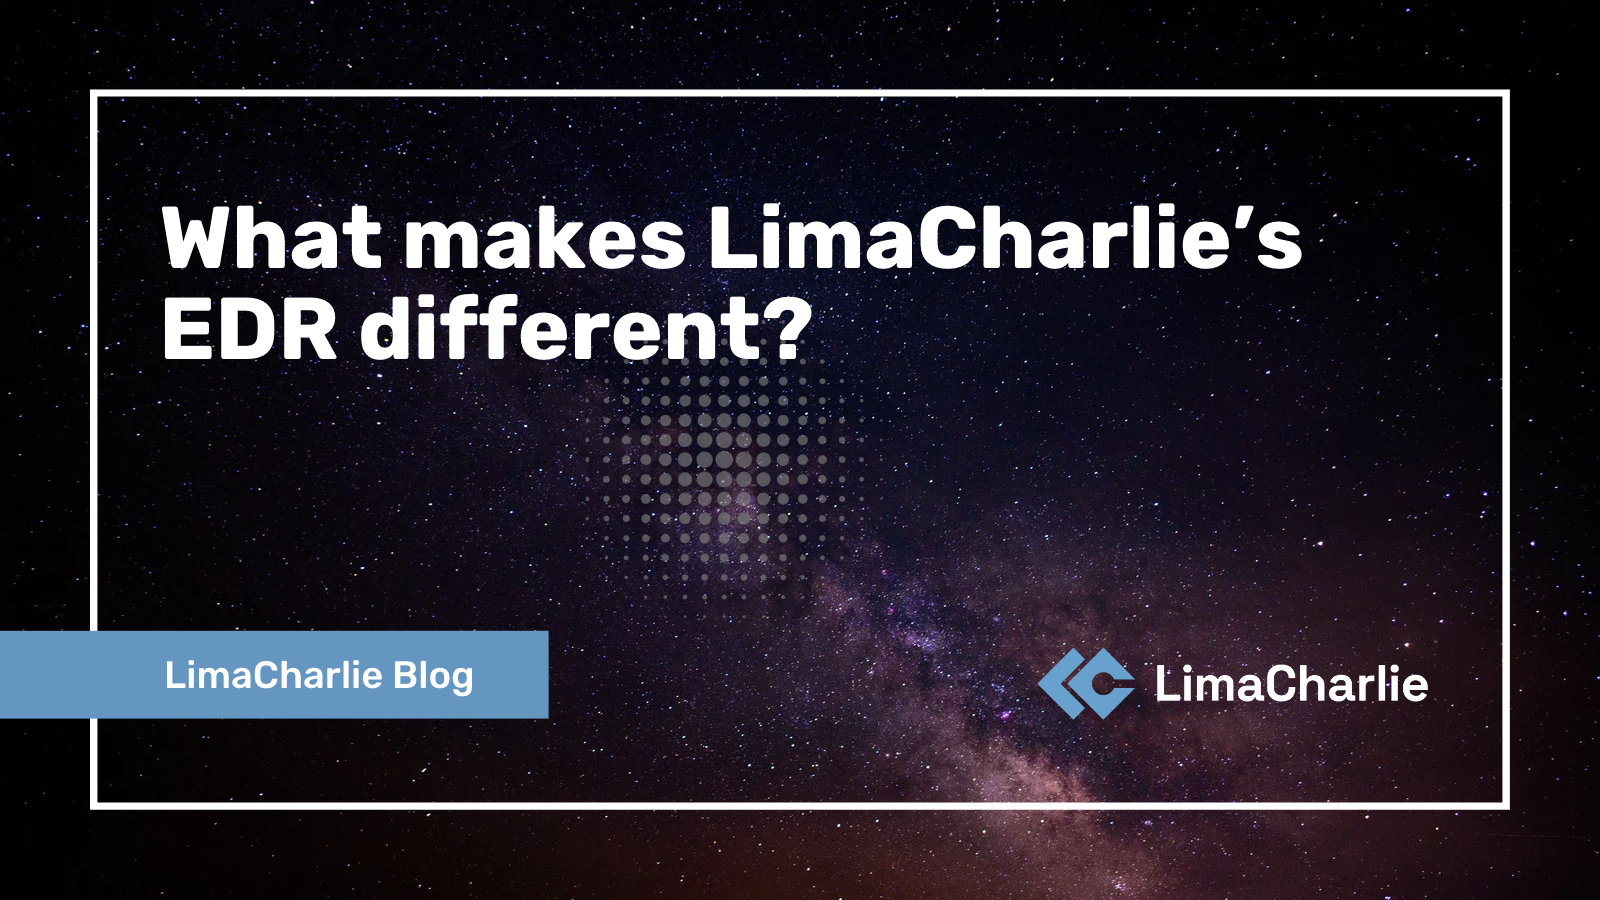 What makes LimaCharlie’s EDR different?